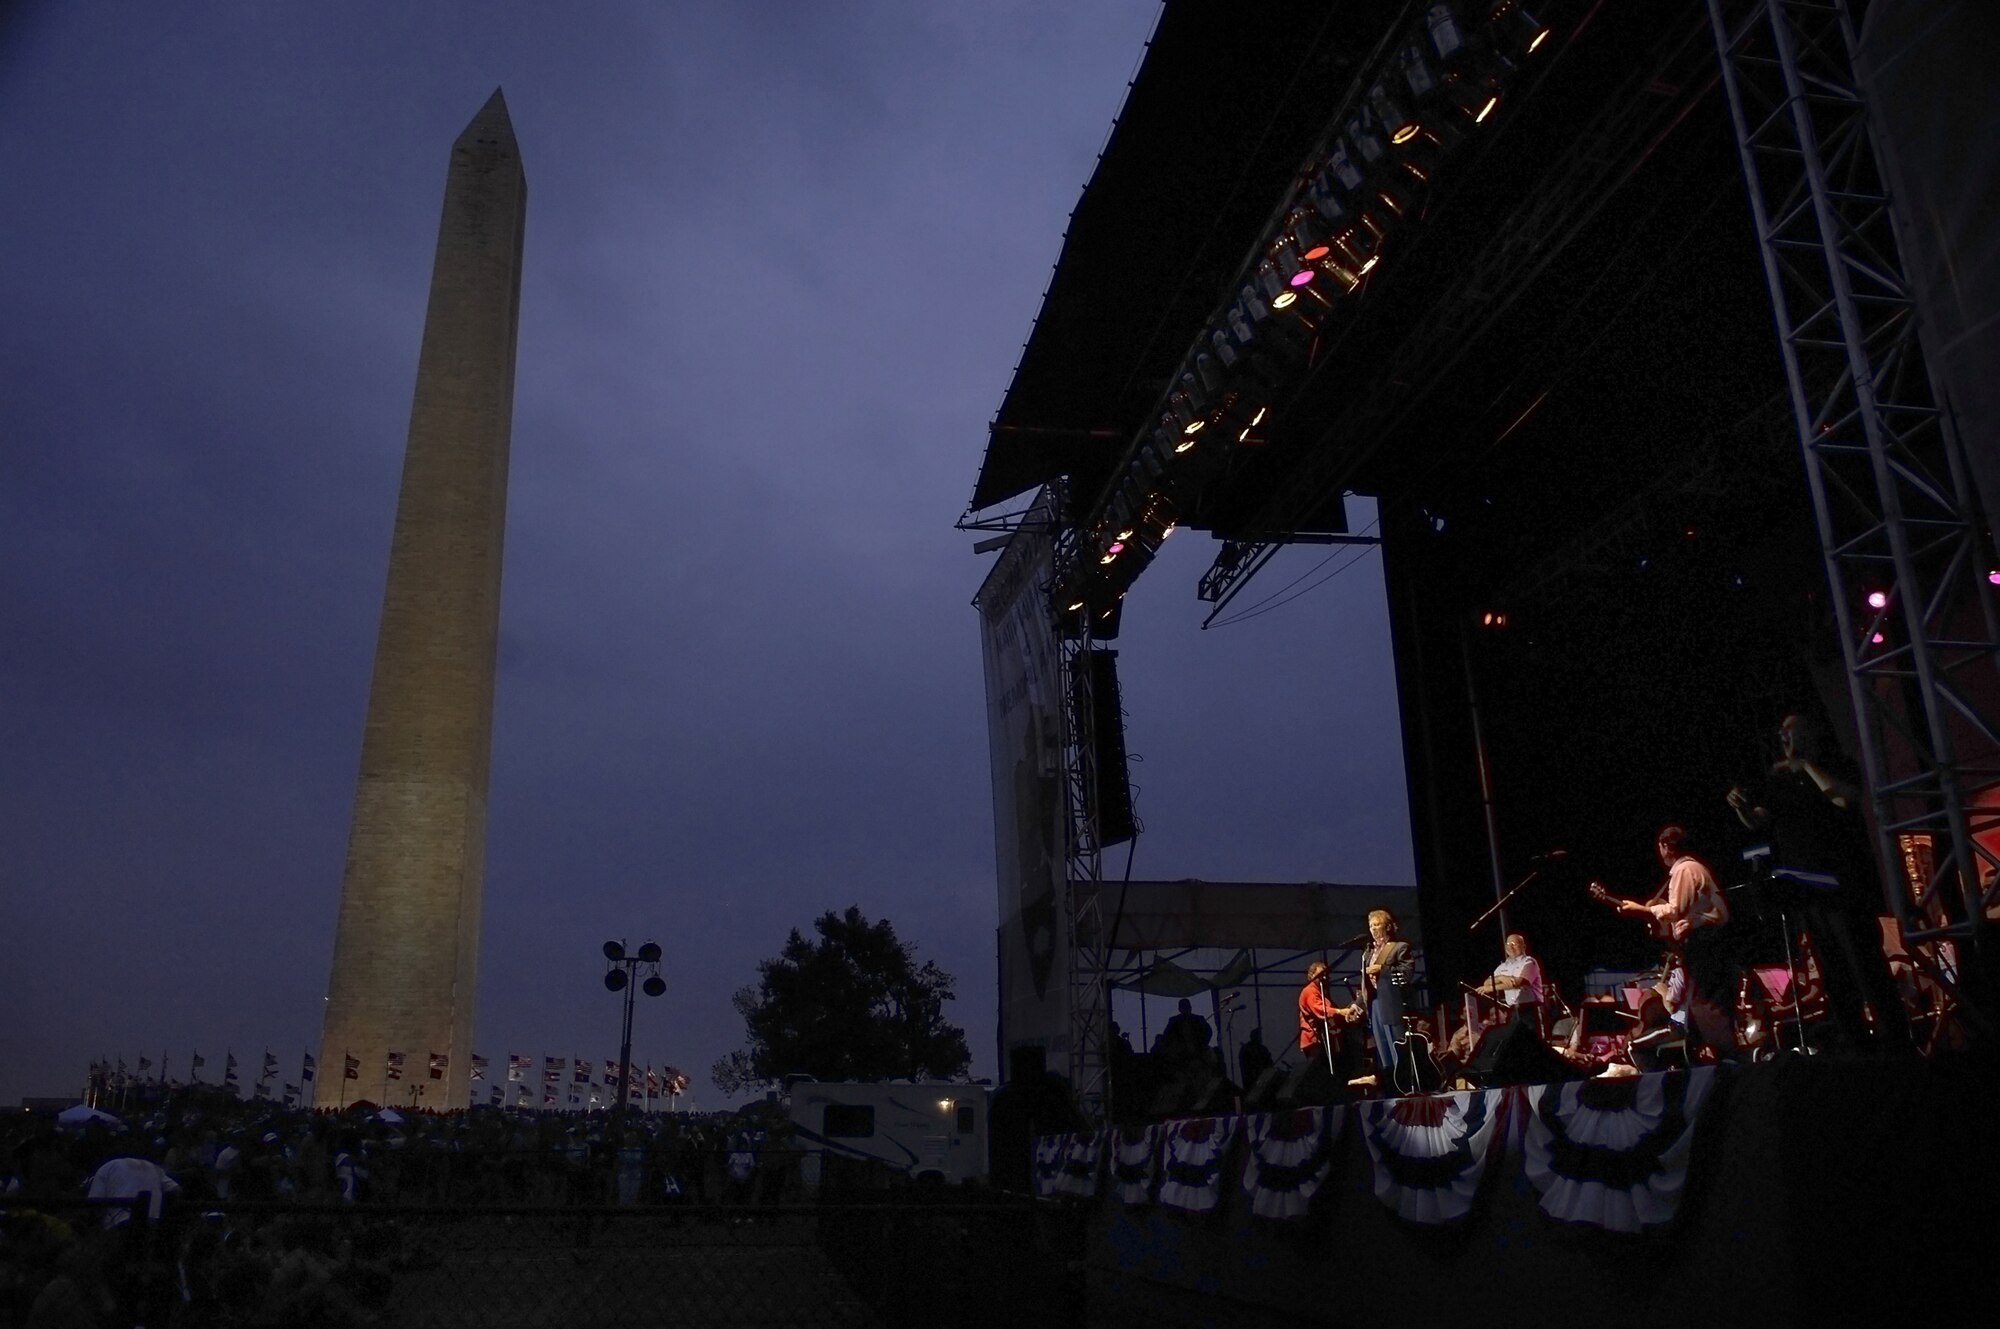 Larry Gatlin and the Gatlin Brothers perform on stage with the U.S. Air Force Band July 4 at the Washington Monument. The Band presents a special concert open to the public at the base of the Washington Monument as part of the National Park Service's Independence Day Celebration. The program included the Concert Band, the Singing Sergeants, Max Impact and a special appearance by the Grammy Award-winning country artists Larry Gatlin and the Gatlin Brothers. (U.S. Air Force photo by Senior Airman Marleah Miller)